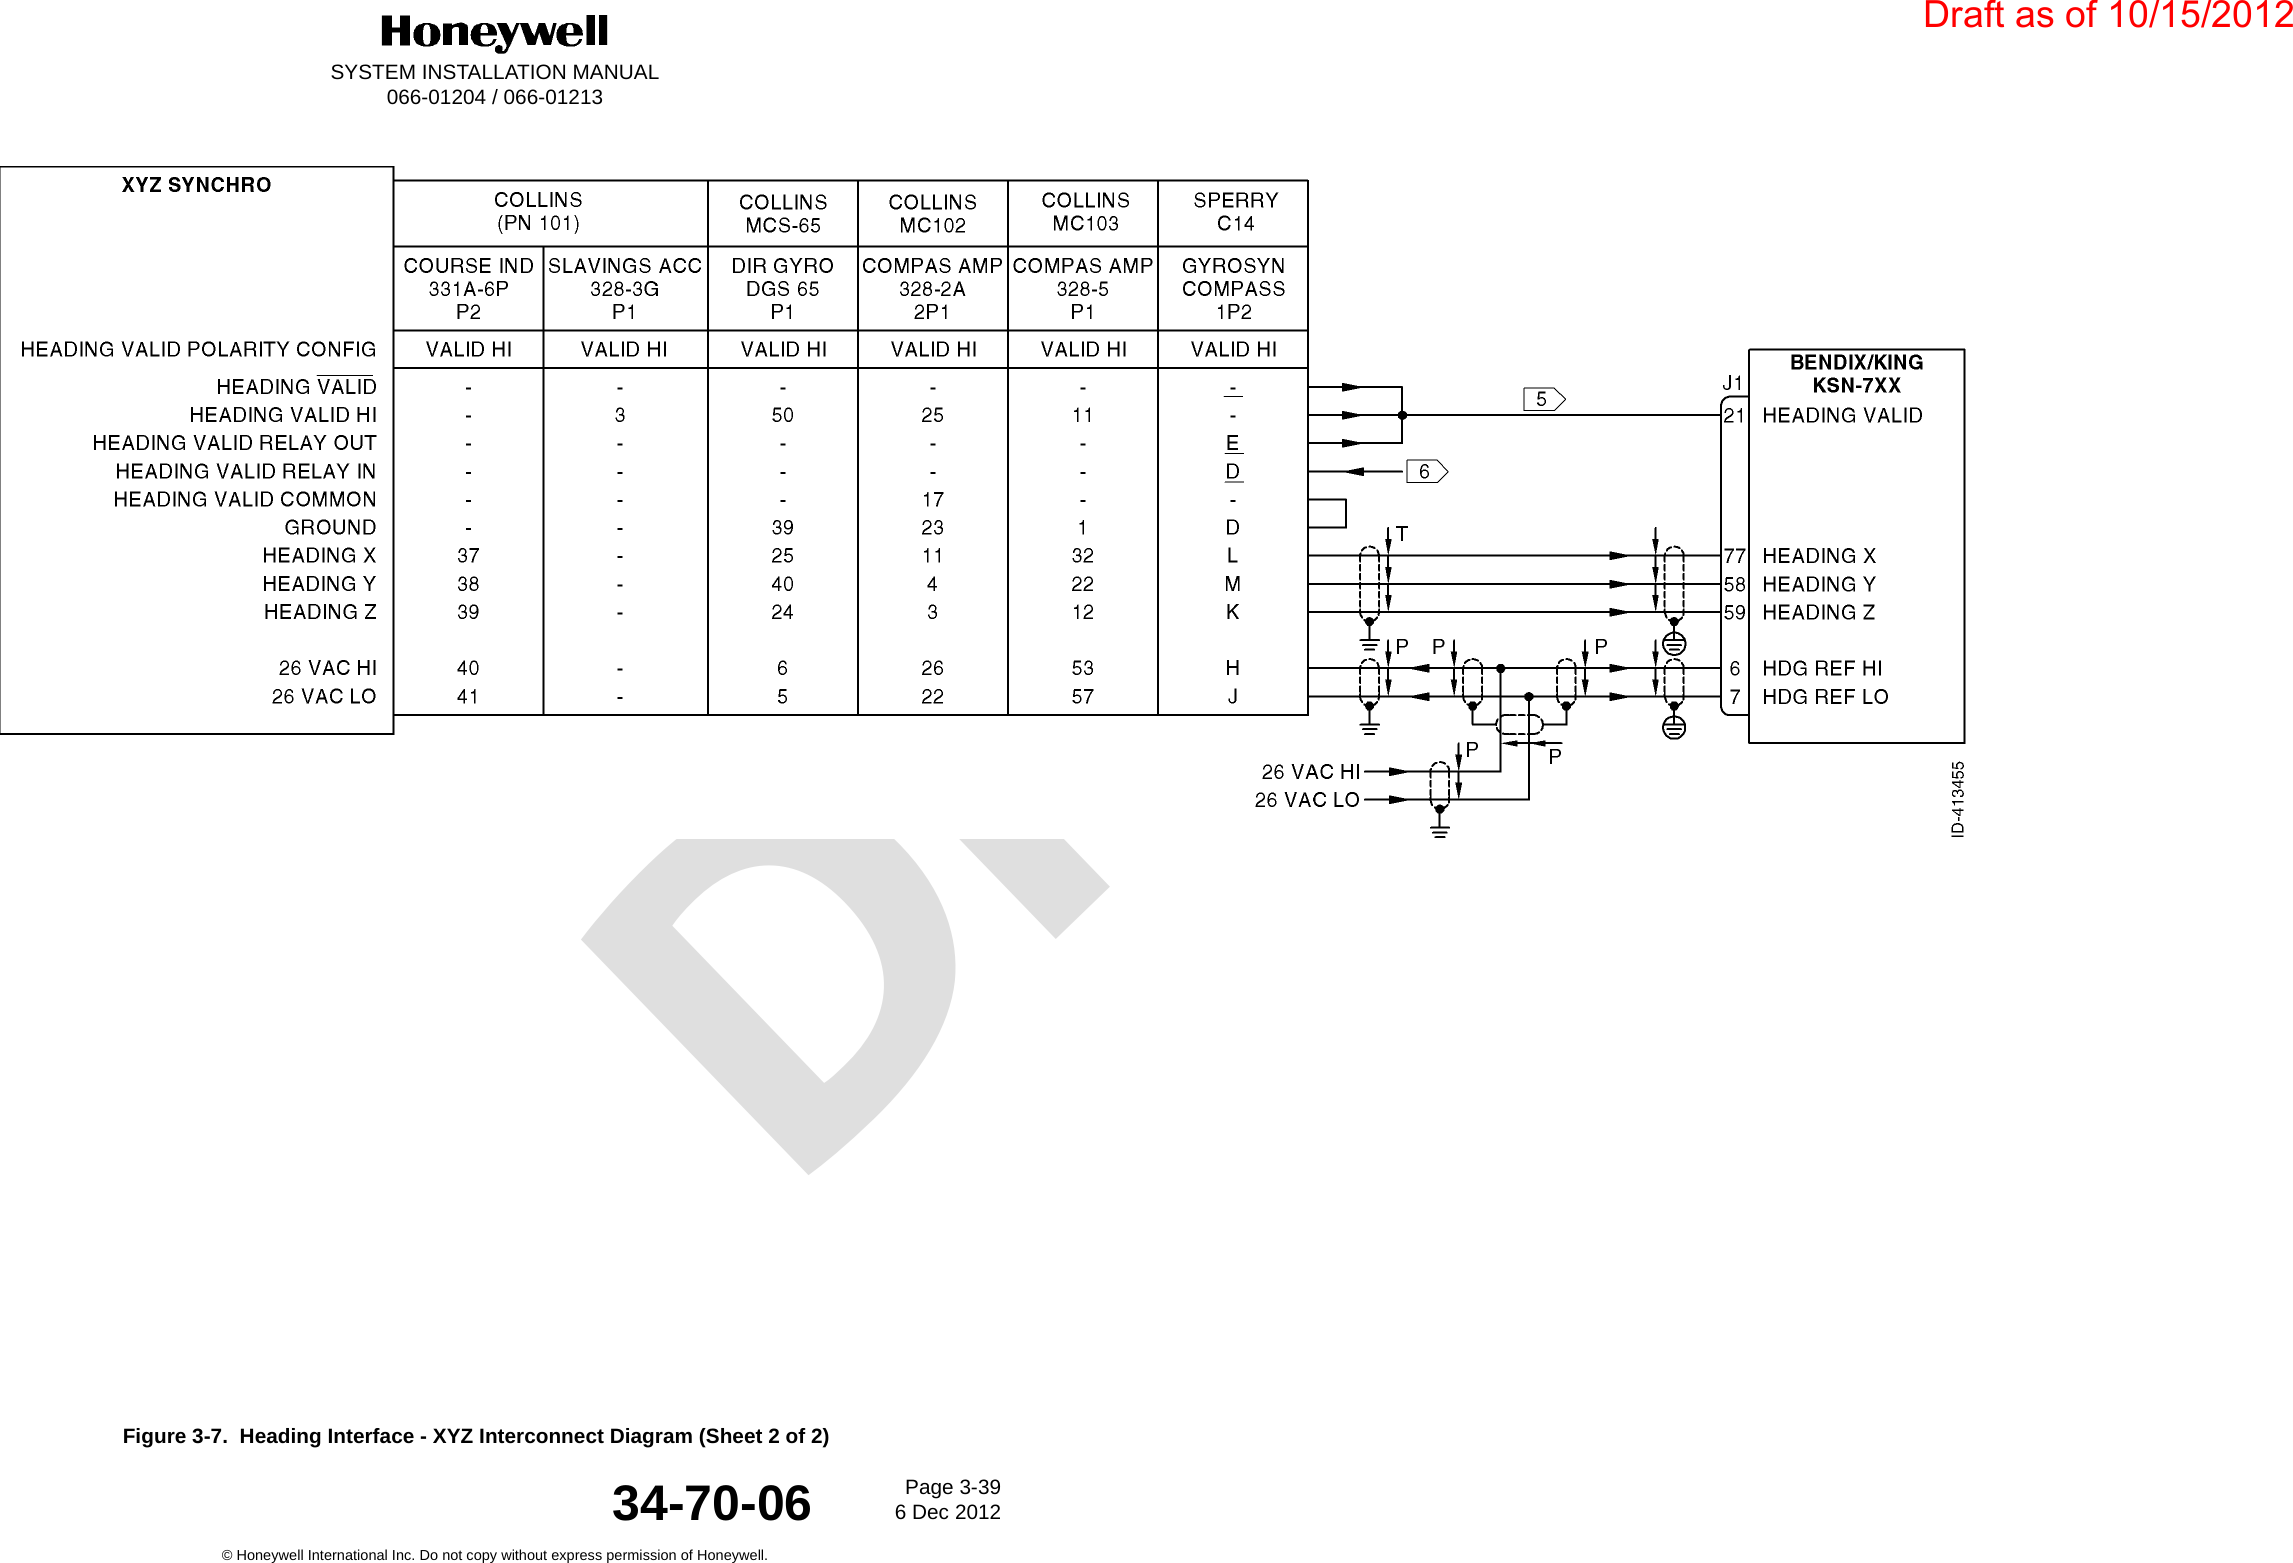 DraftSYSTEM INSTALLATION MANUAL066-01204 / 066-01213Page 3-396 Dec 2012© Honeywell International Inc. Do not copy without express permission of Honeywell.34-70-06Figure 3-7.  Heading Interface - XYZ Interconnect Diagram (Sheet 2 of 2)Draft as of 10/15/2012